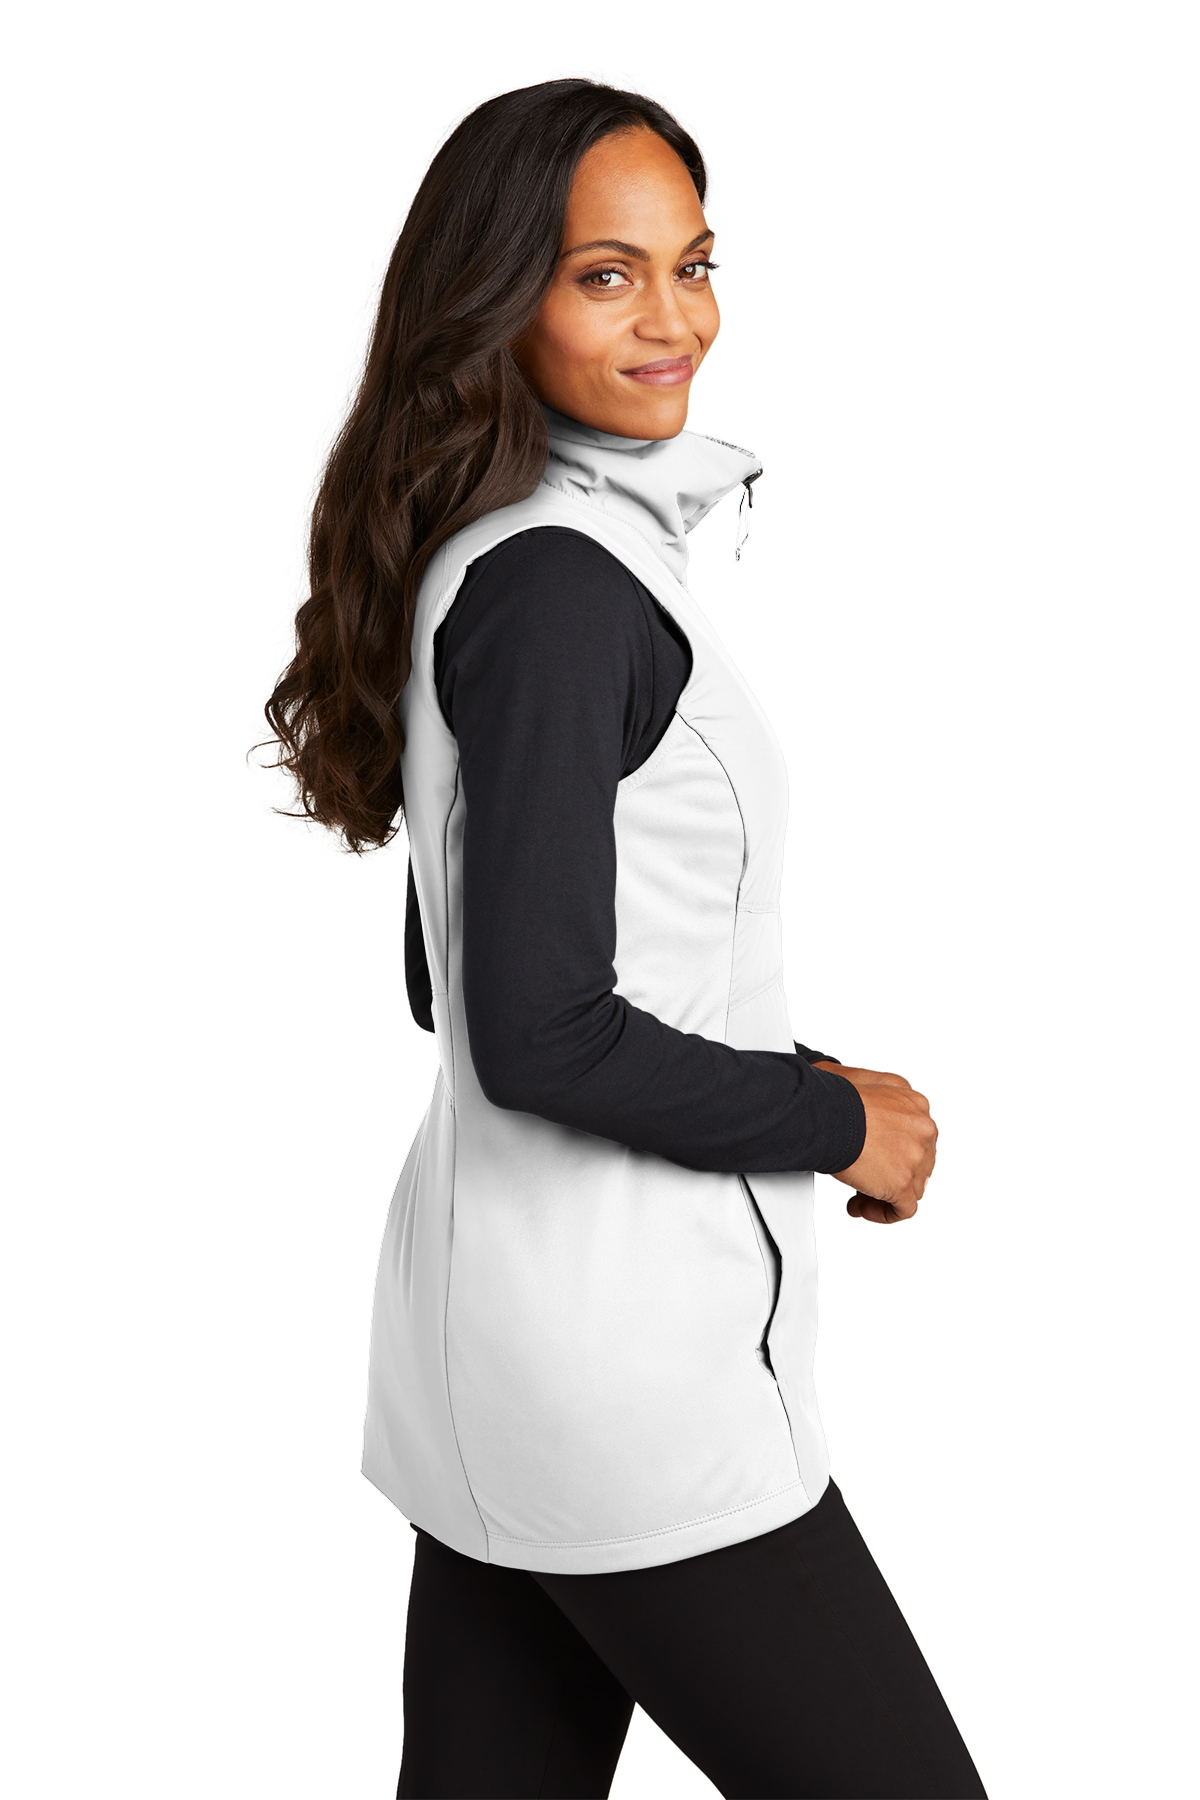 Senorita Ladies Thermal Long Sleeved Vest - Warm and Seamless - Size OS,  Cream >>> For more information, visit image link.